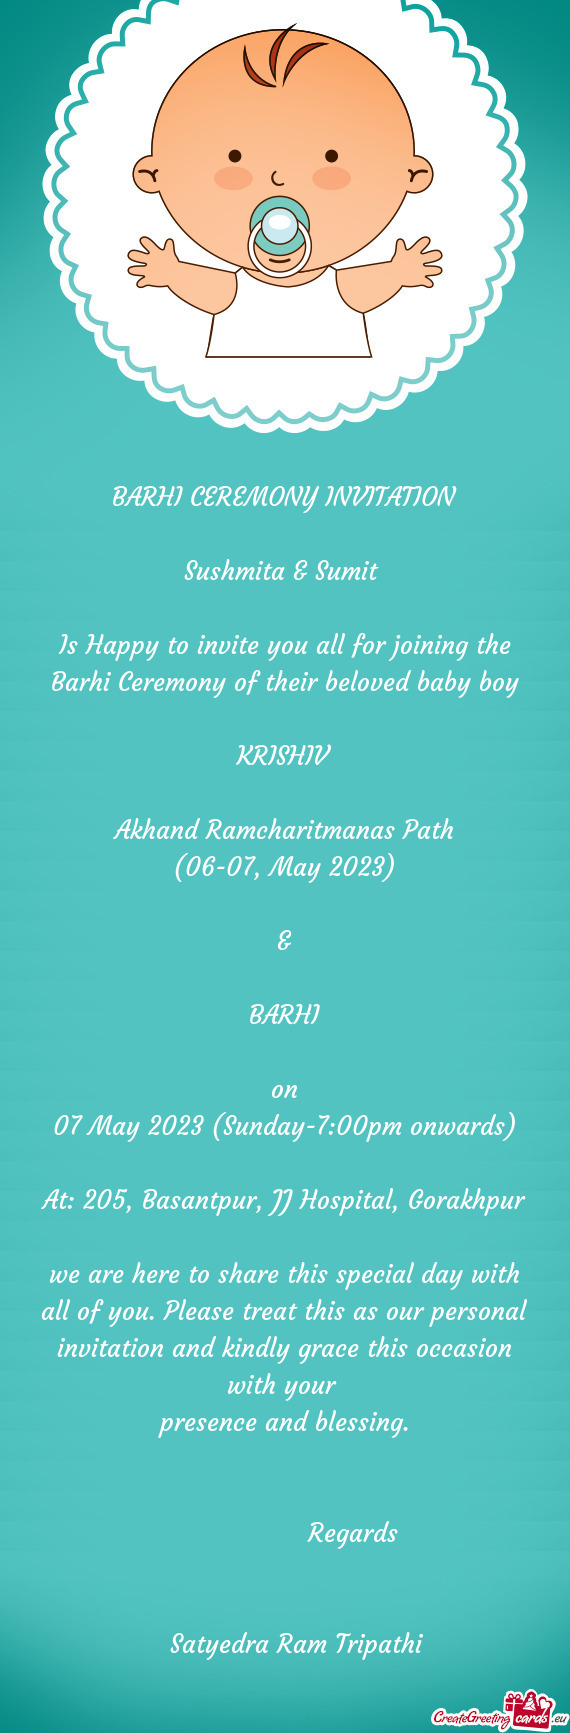 Is Happy to invite you all for joining the Barhi Ceremony of their beloved baby boy